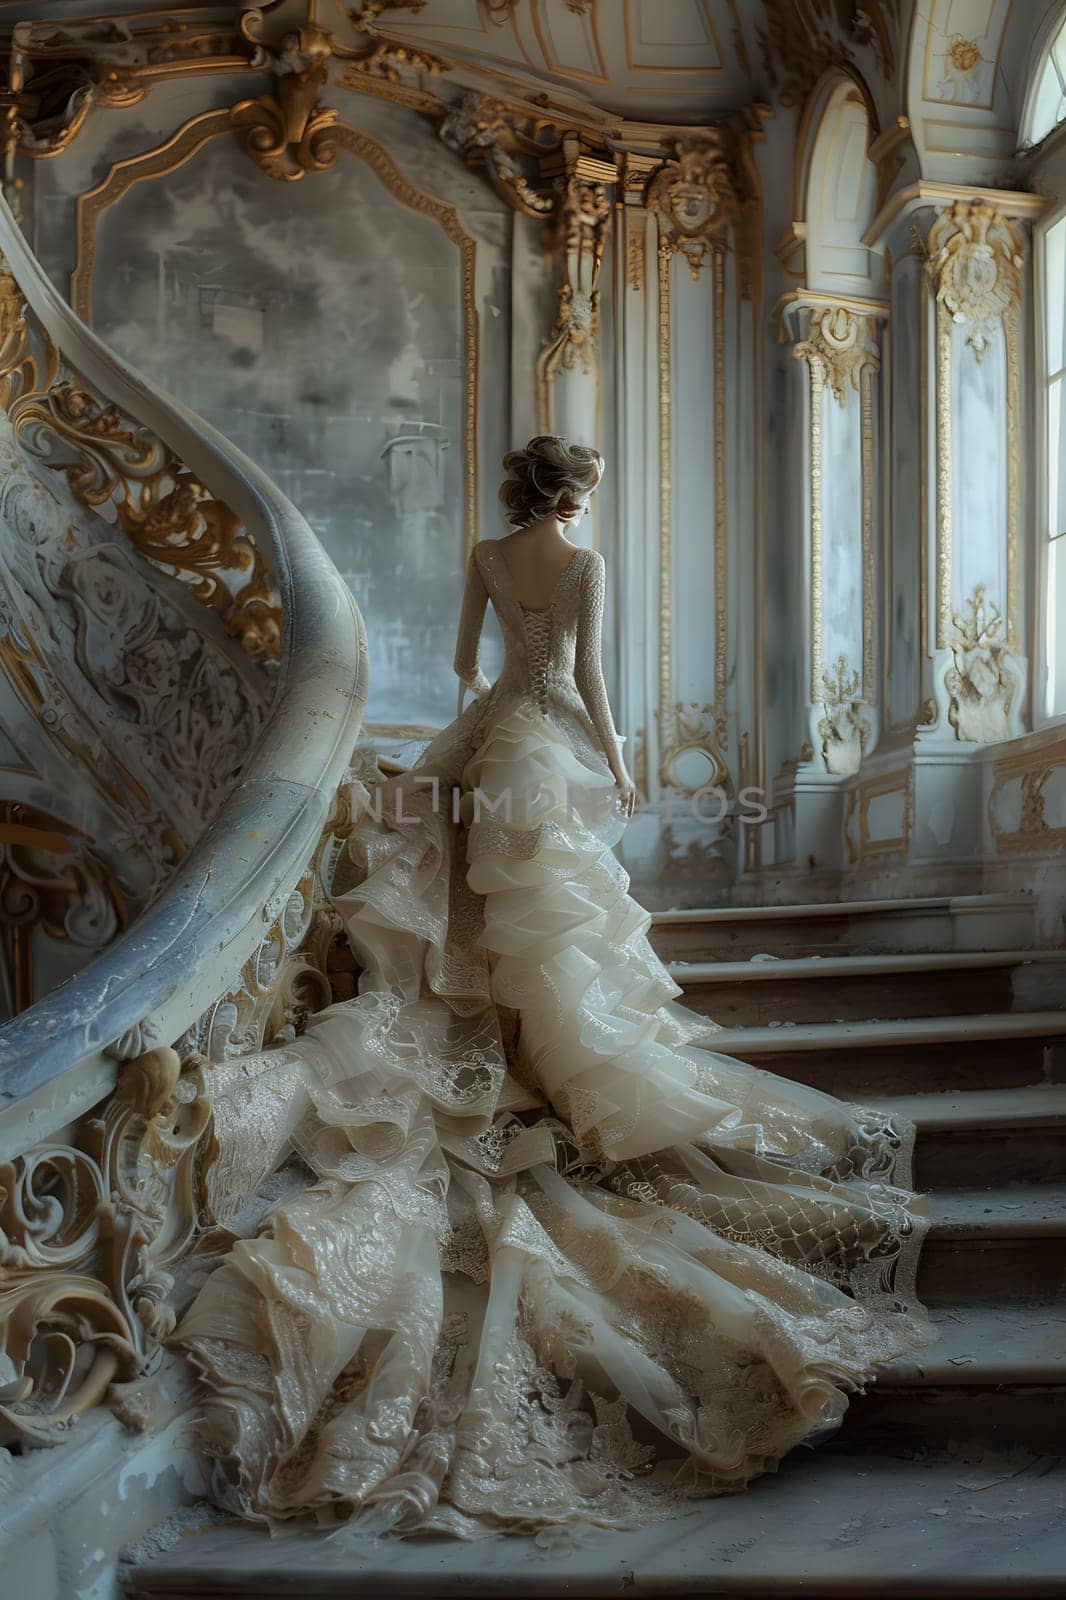 A woman in a beautiful long wedding gown is descending a wooden staircase in a stunning building. The elegant dress flows gracefully as she makes her way to the formal event below